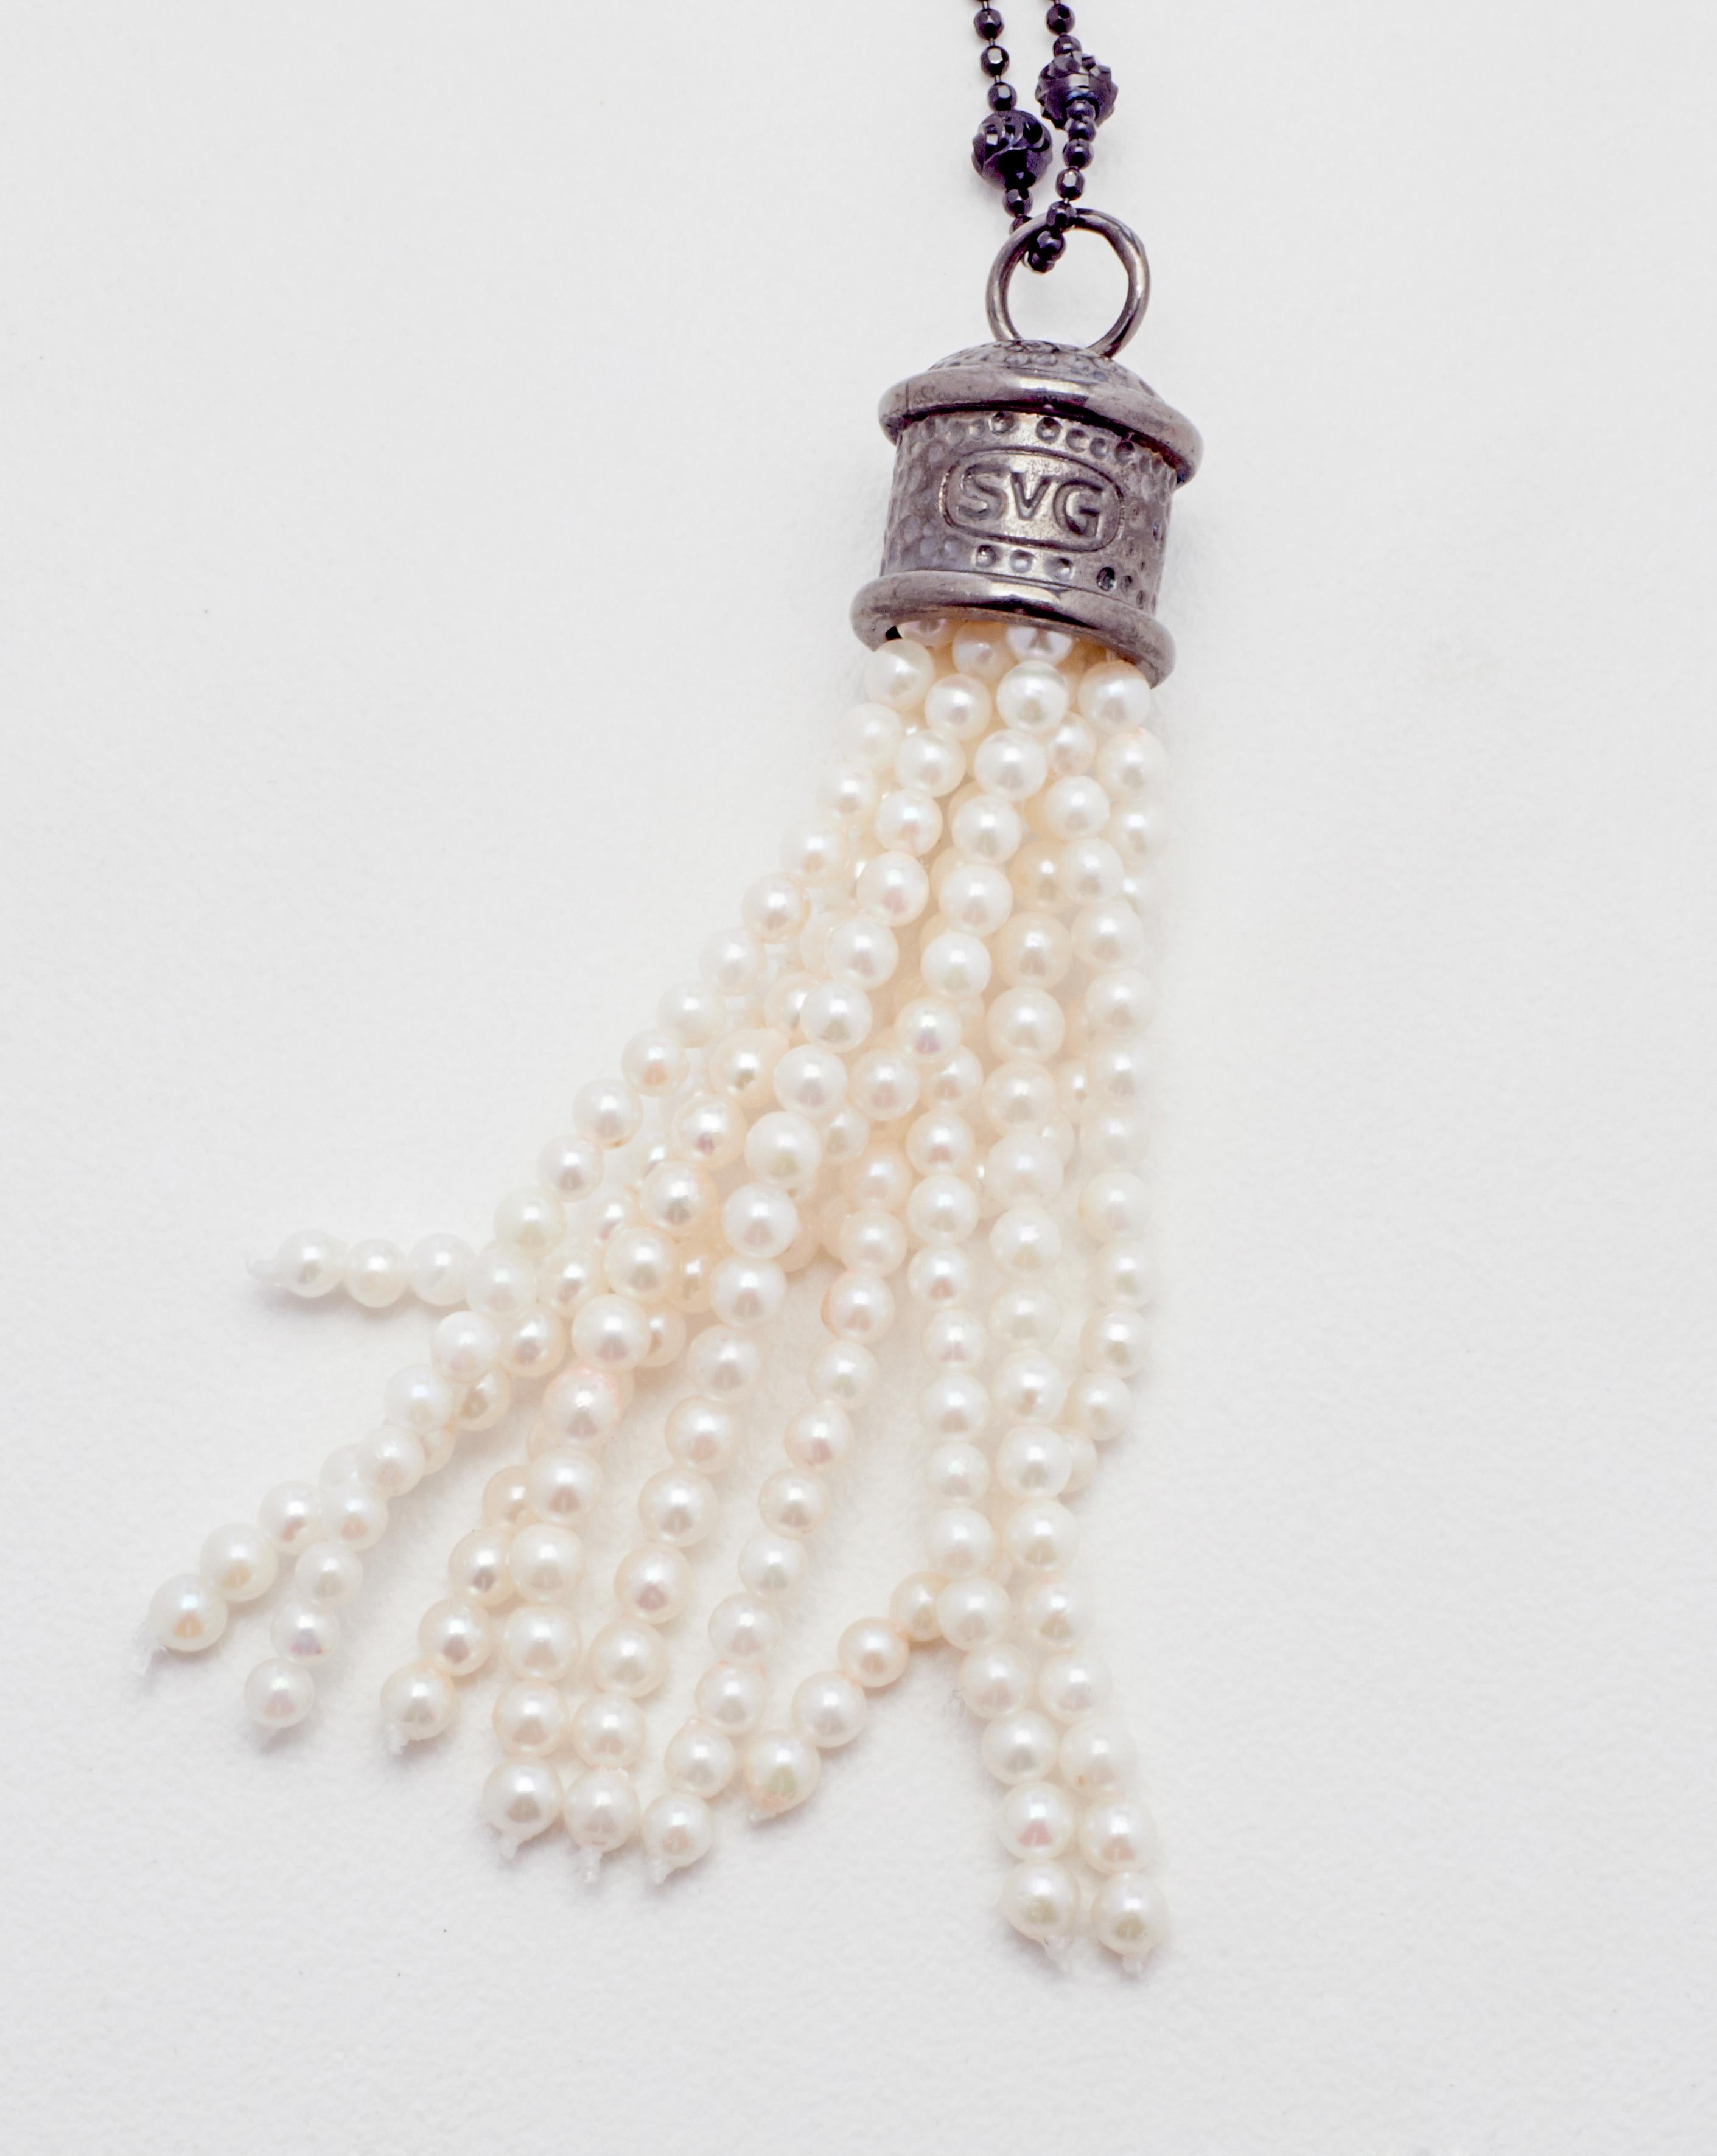 Artisan Black Sterling Silver Chain Necklace with Genuine Akoya Pearl Tassel 